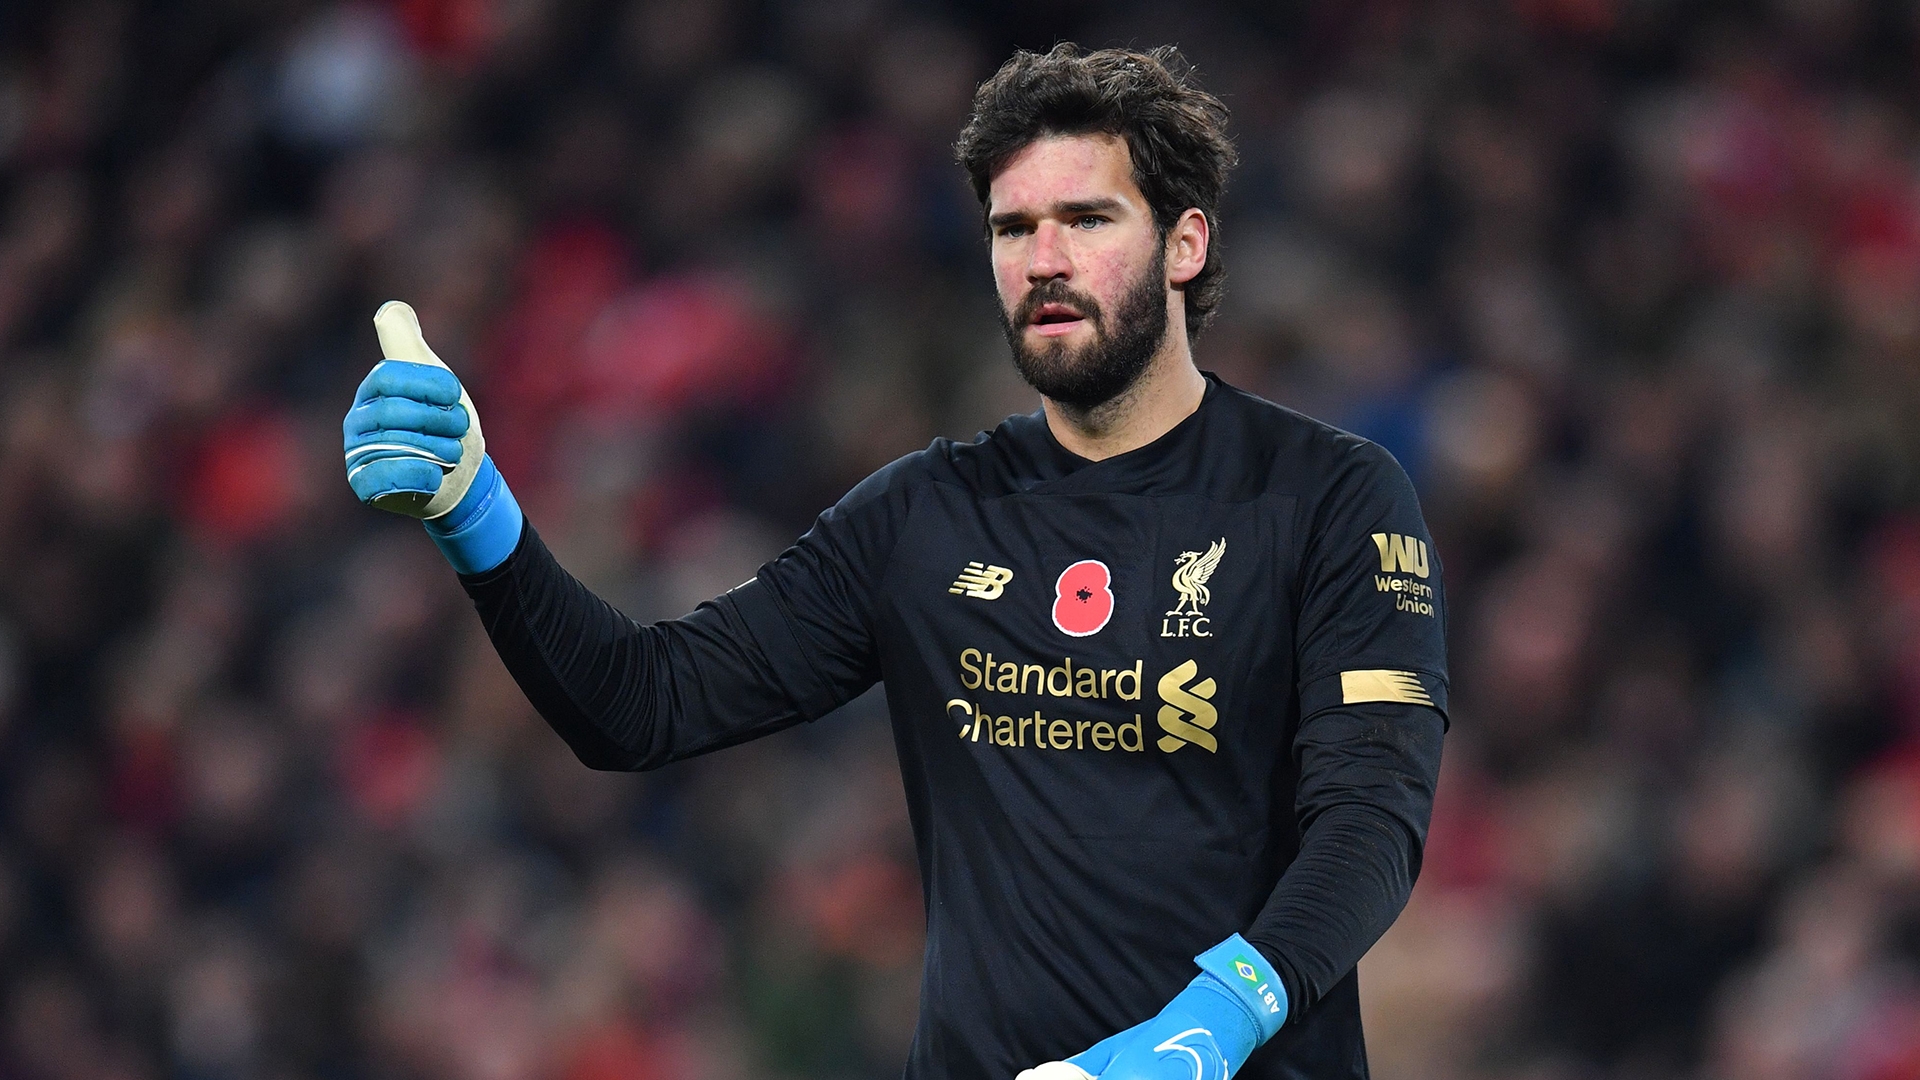 Alisson Becker Bio, age, position, salary and net worth in 2022, girlfriend, facts, football Career